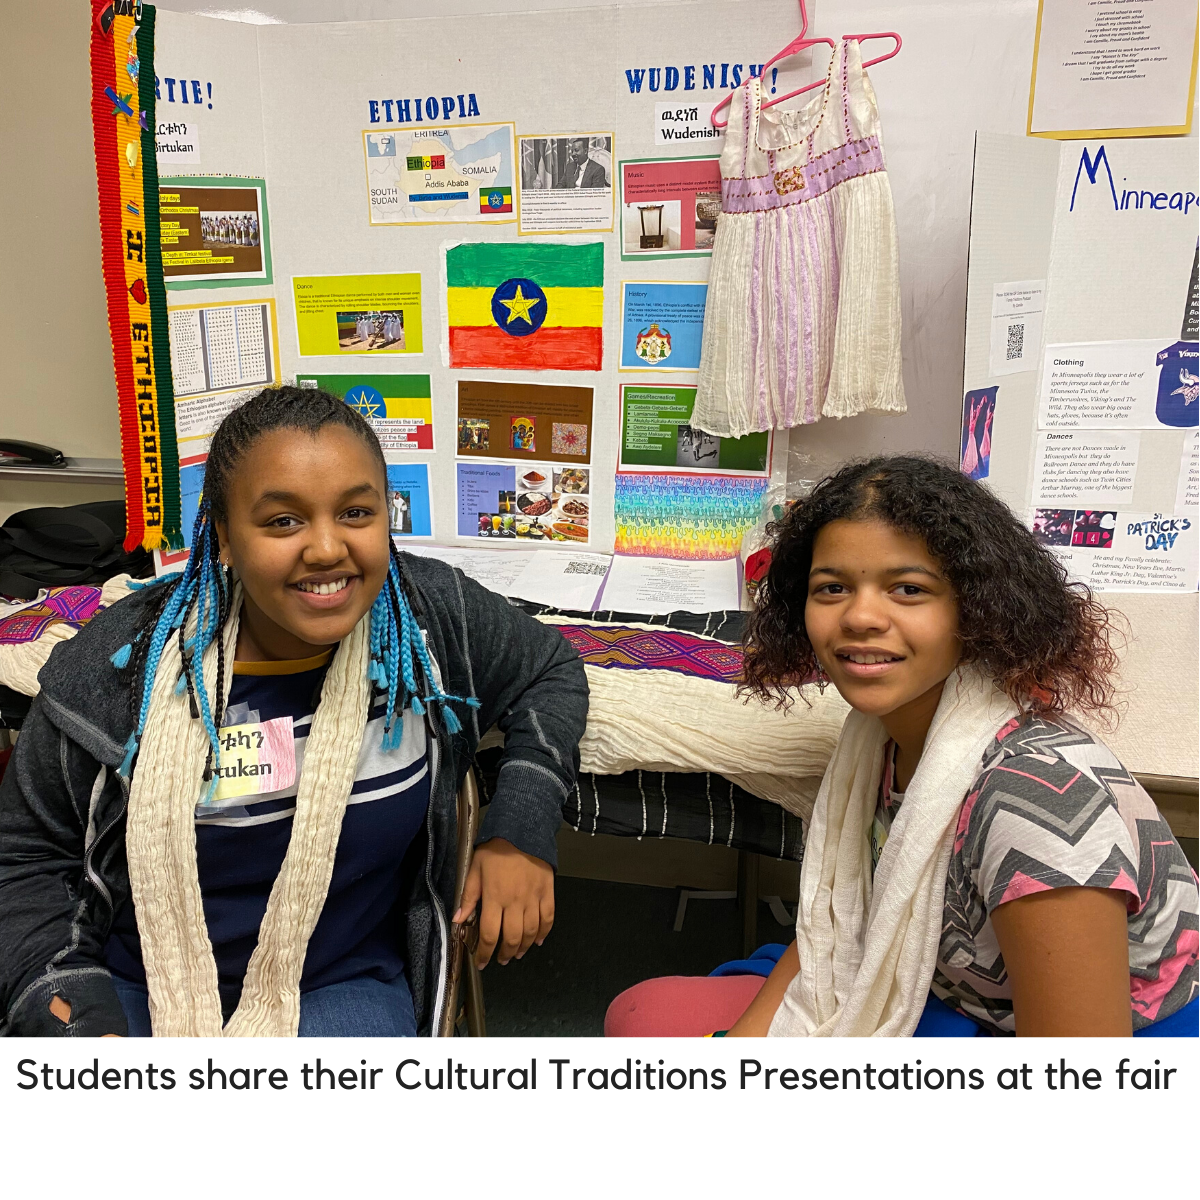 Students share their cultural traditions at the fair